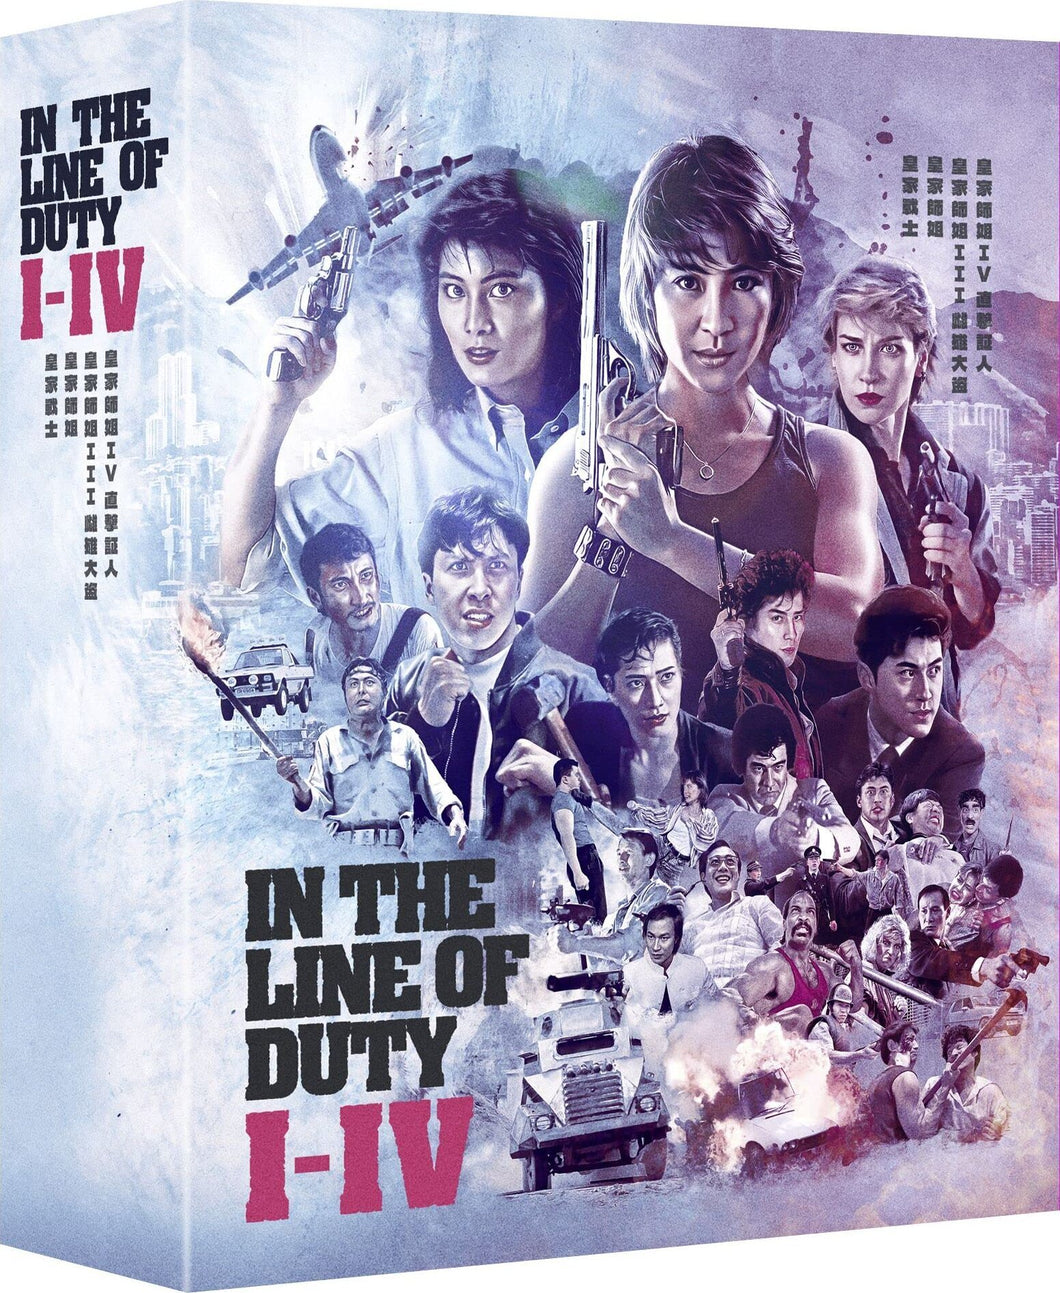 Coffret In the Line of Duty: I - IV (1985-1989) - front cover